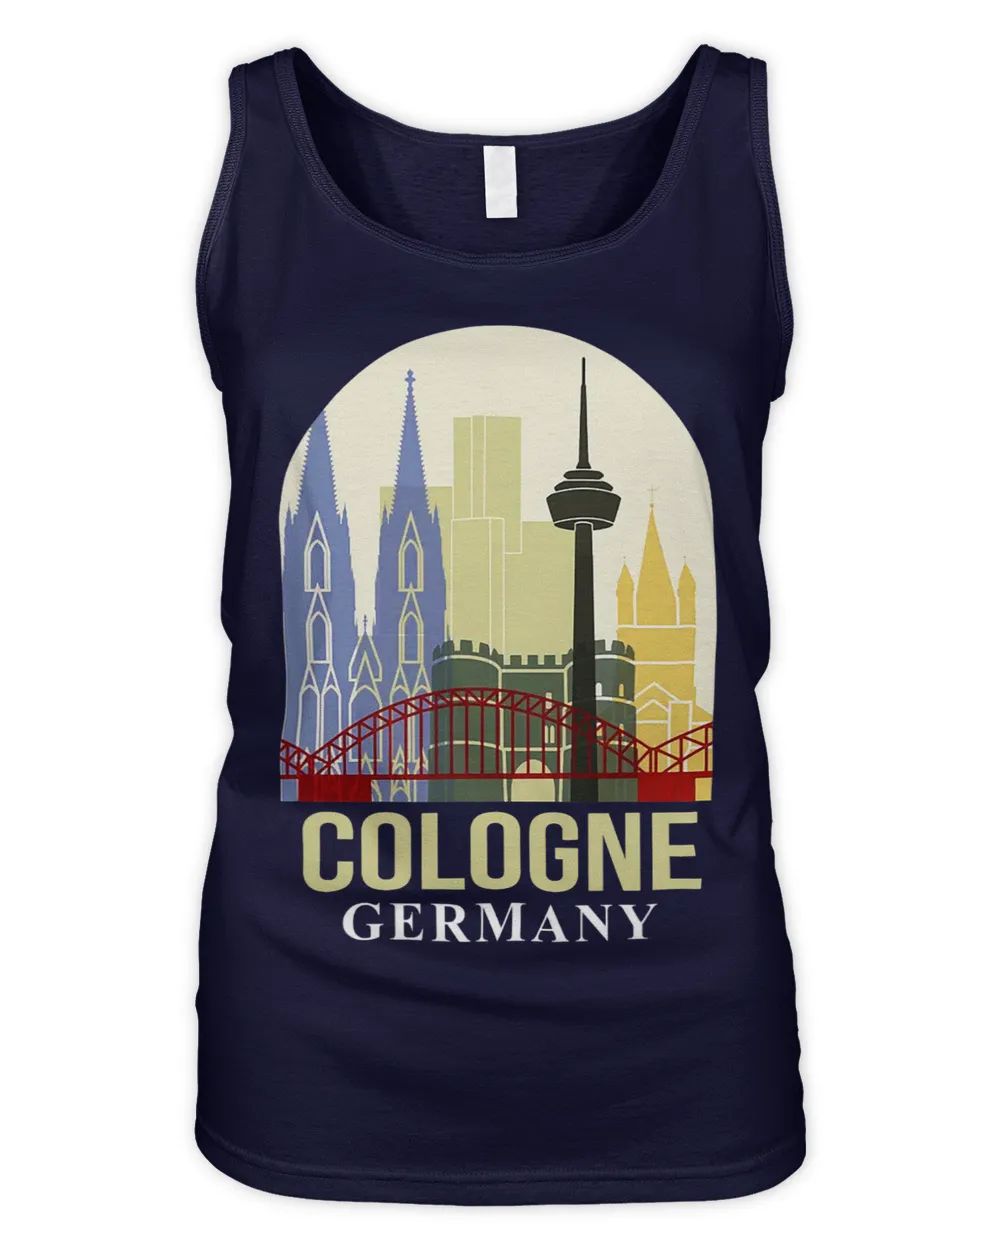 Cologne Germany Travel Poster Meet Me In Cologne Traveling